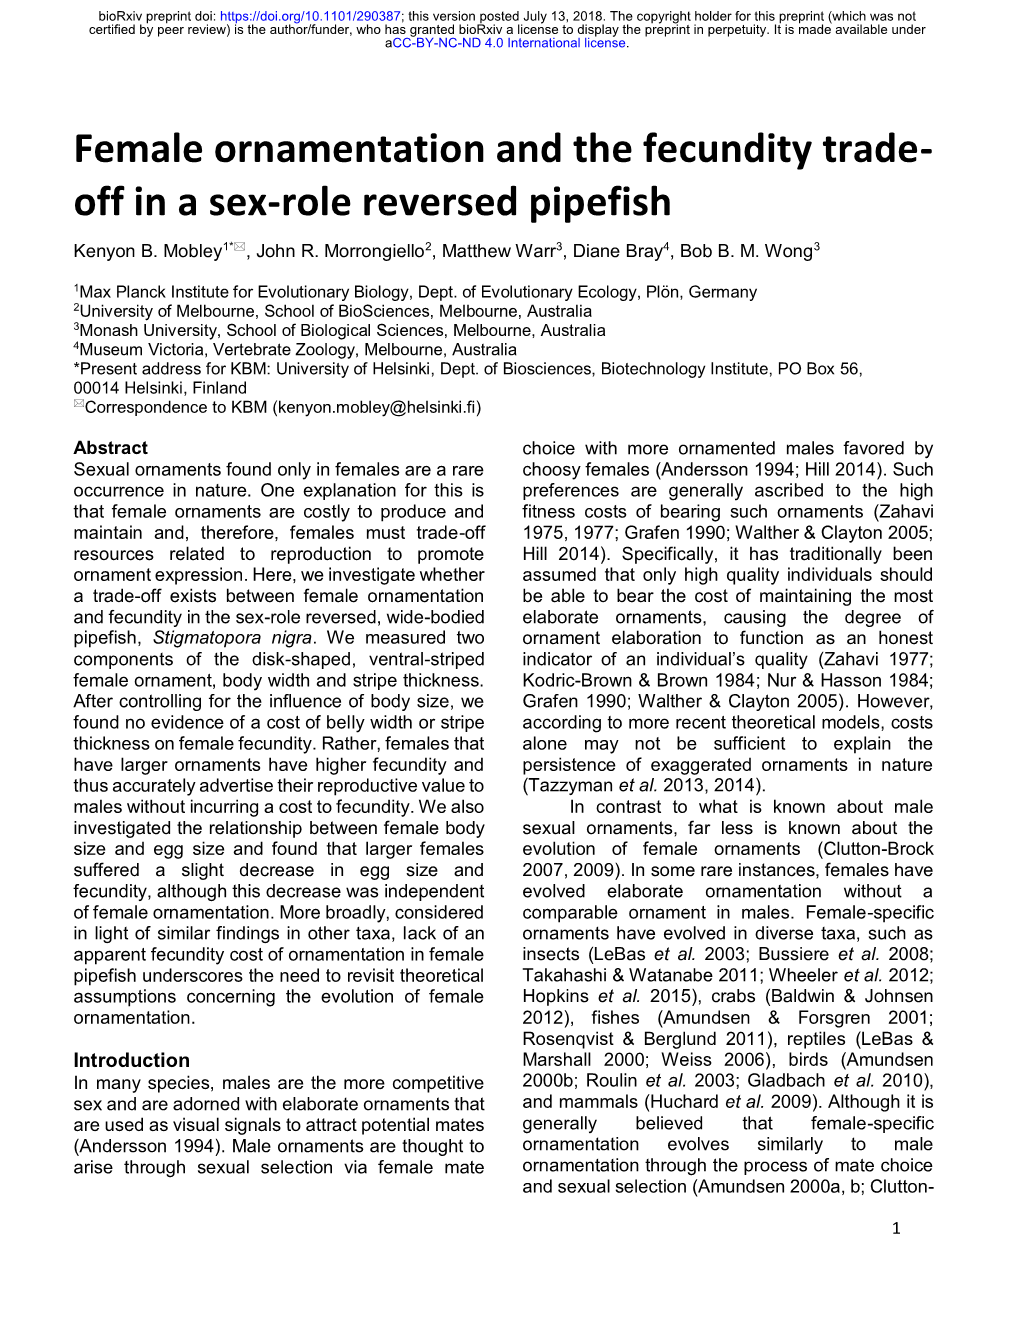 Female Ornamentation and the Fecundity Trade-Off in a Sex-Role